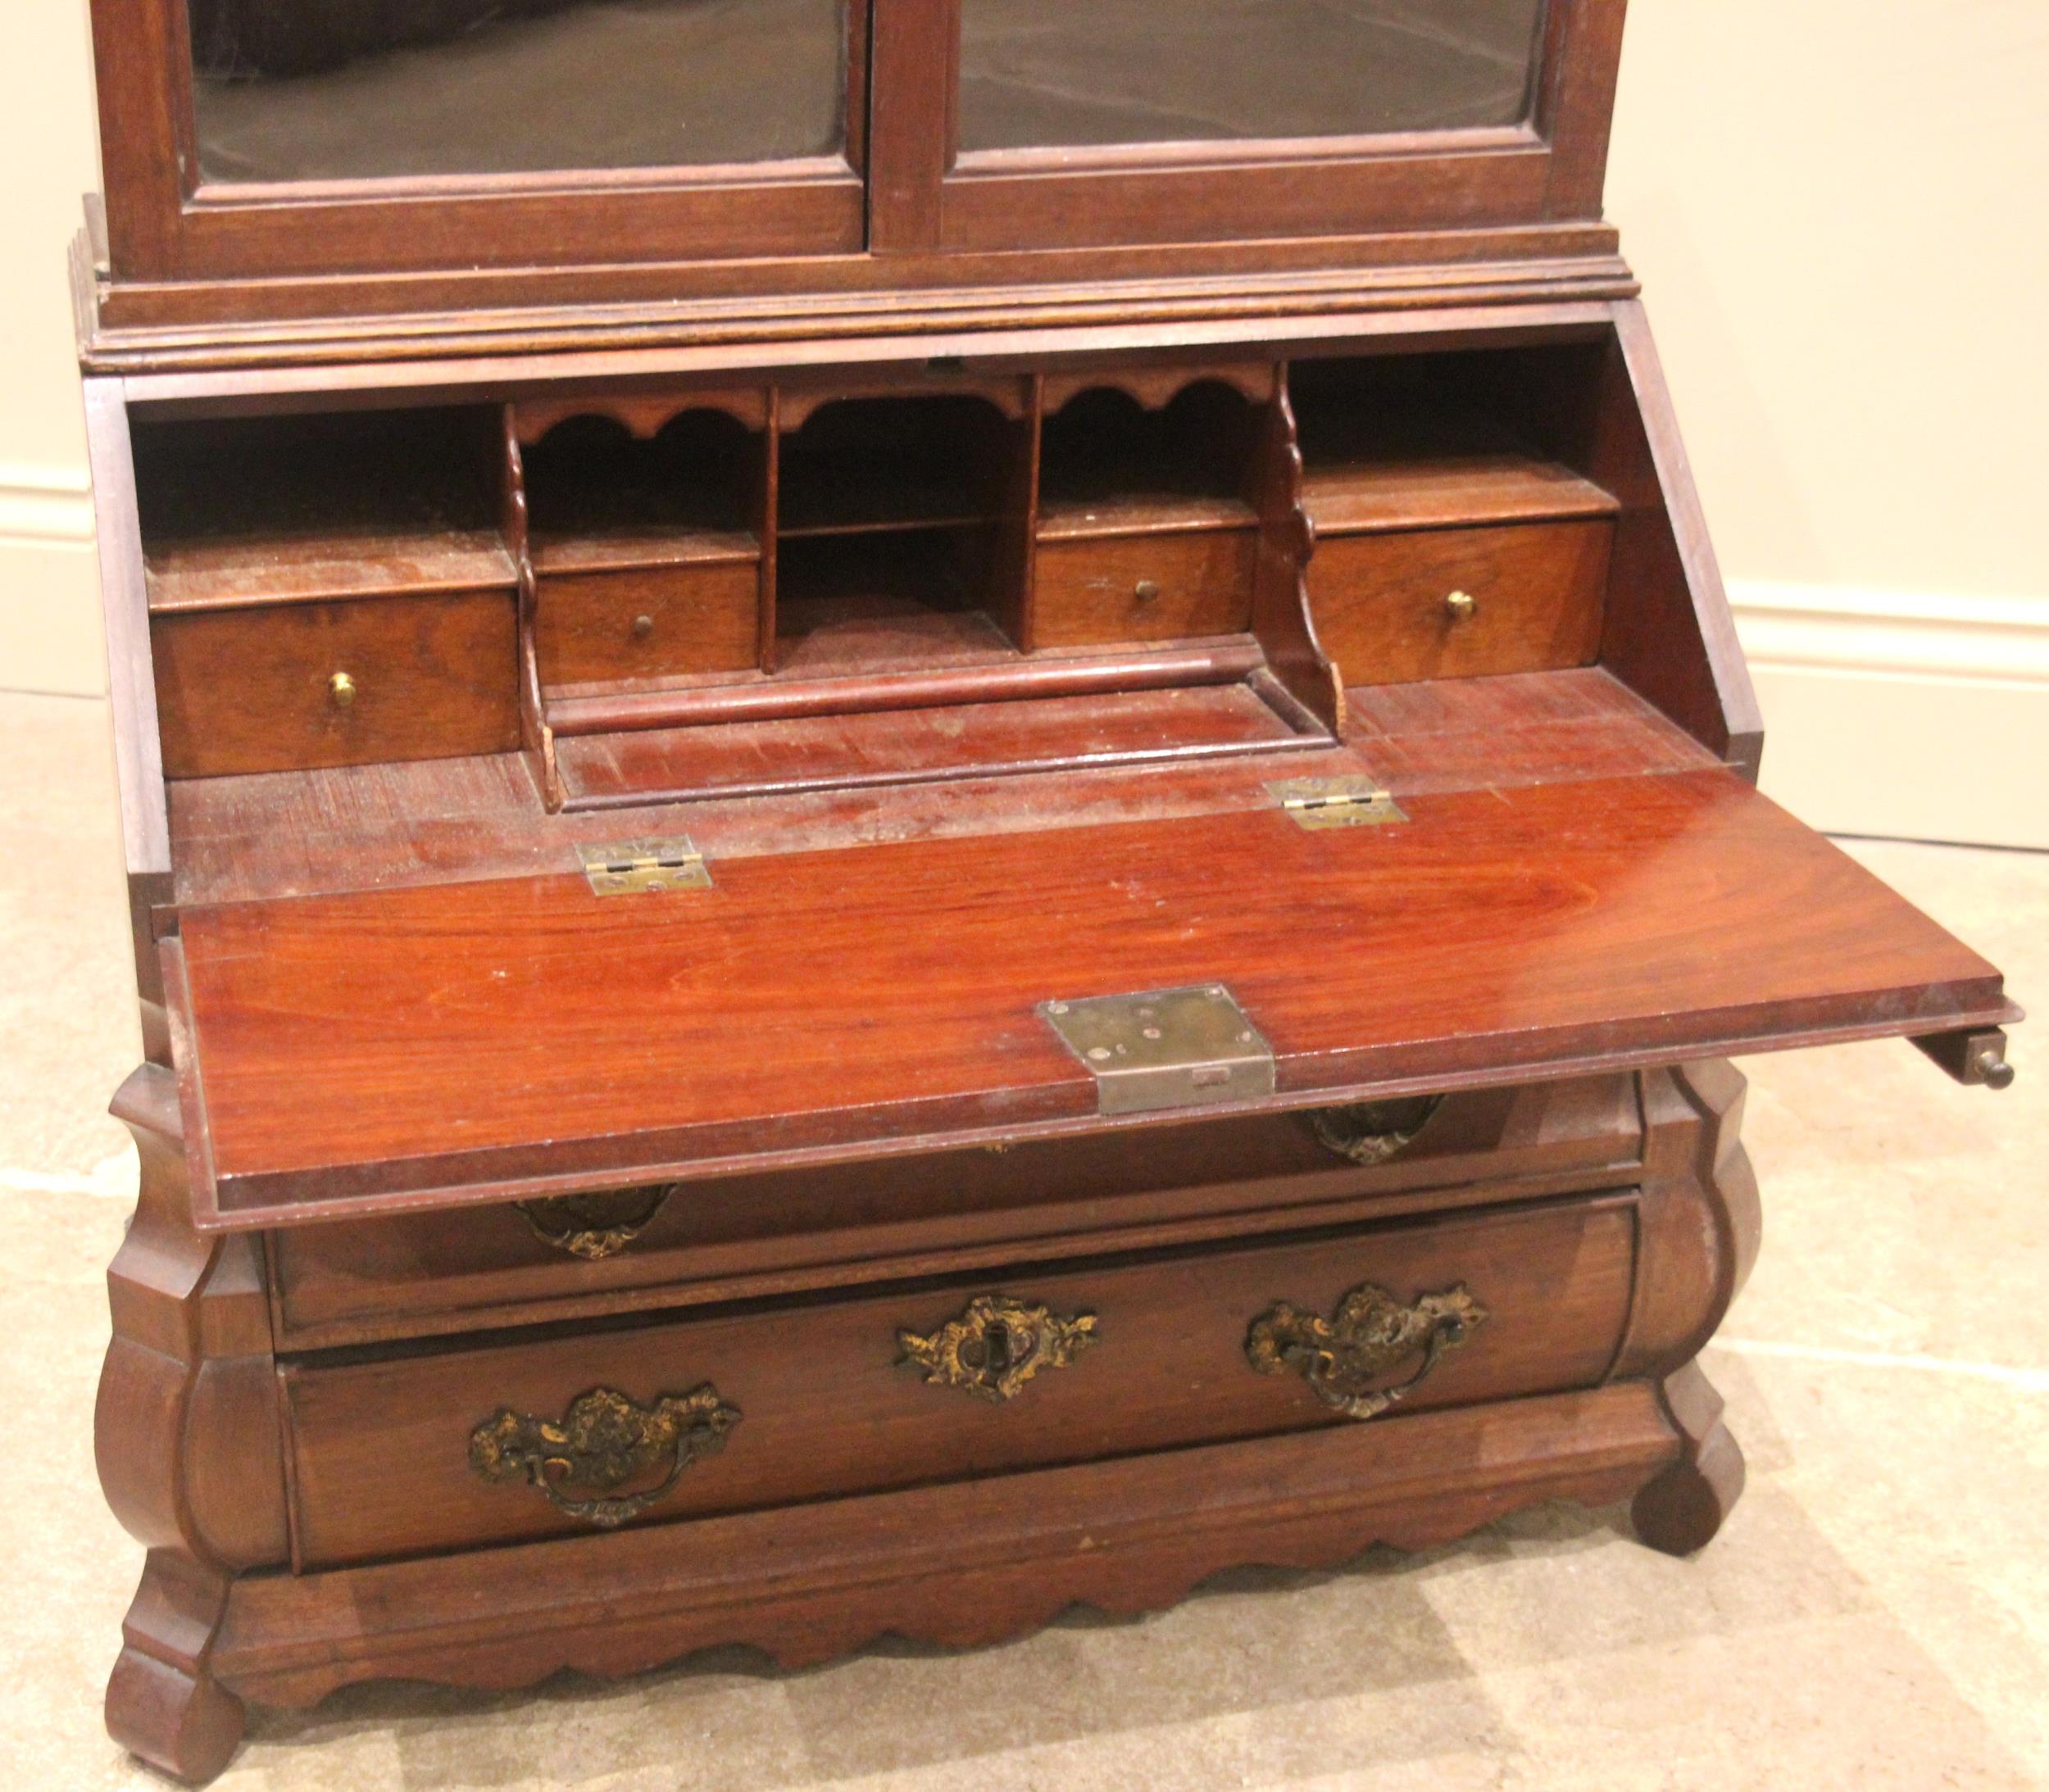 An 18th century Dutch walnut apprentice bombe bureau bookcase, the arched top with a carved crest - Image 2 of 4